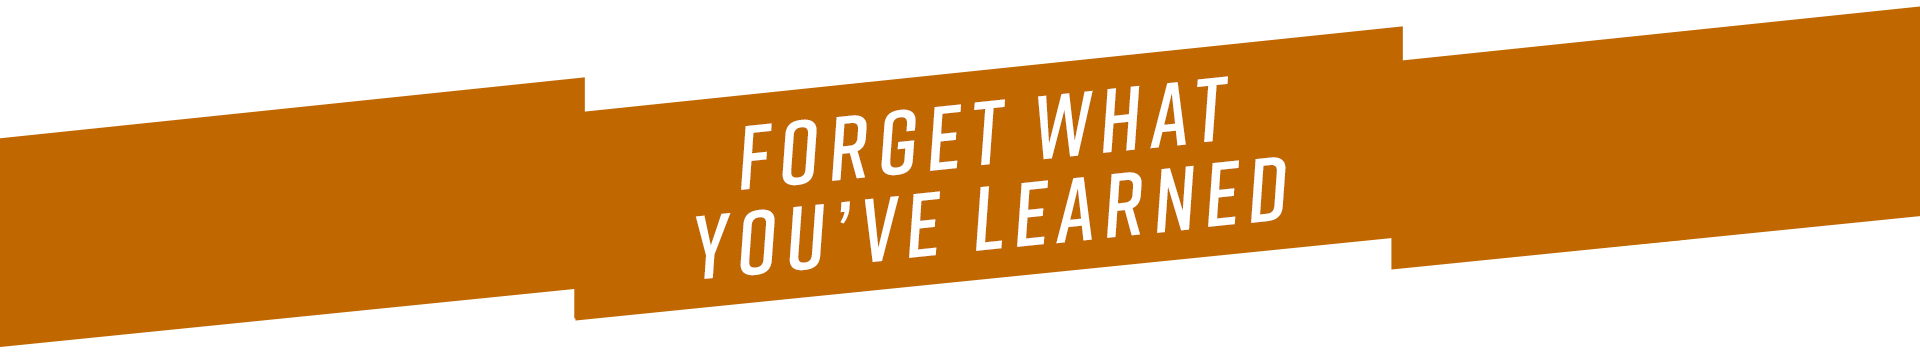 Forget What You've Learned